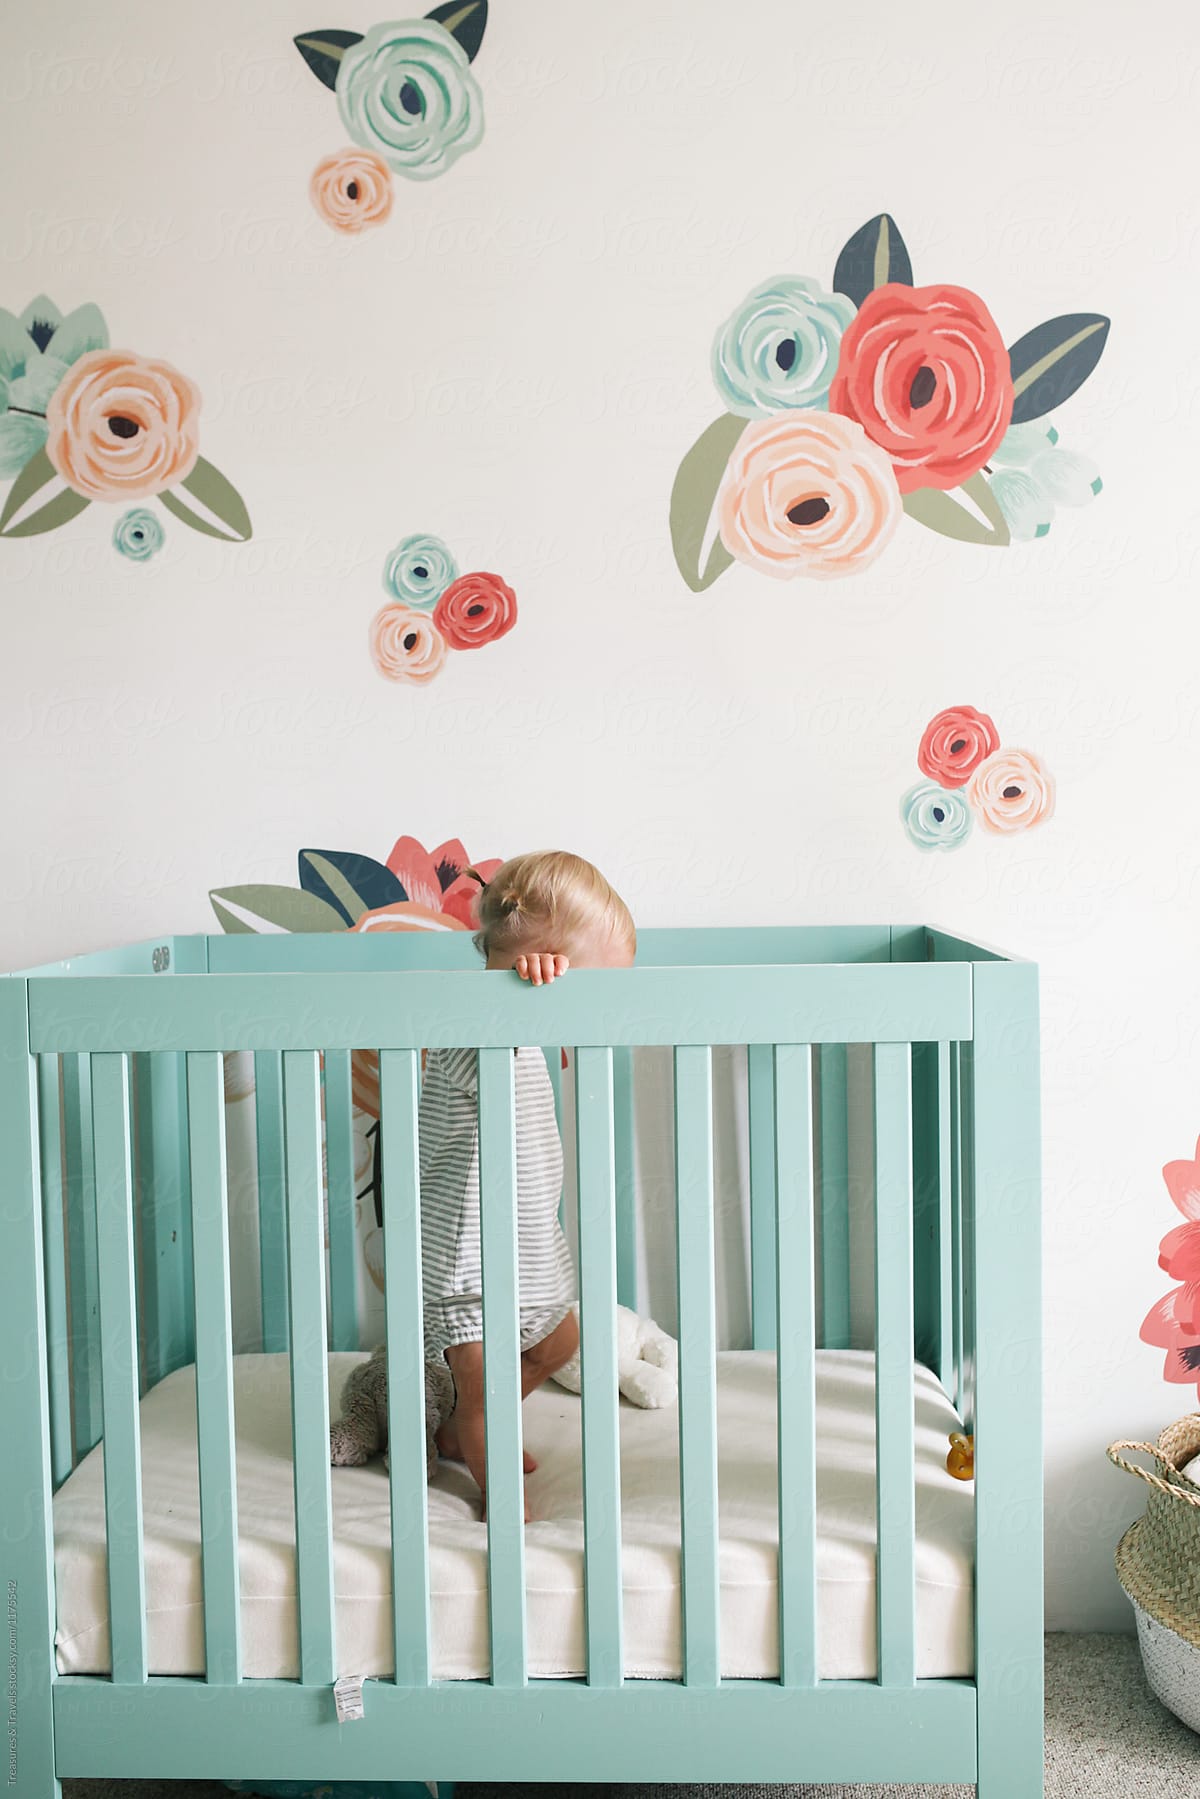 Toddler Standing in Her Crib